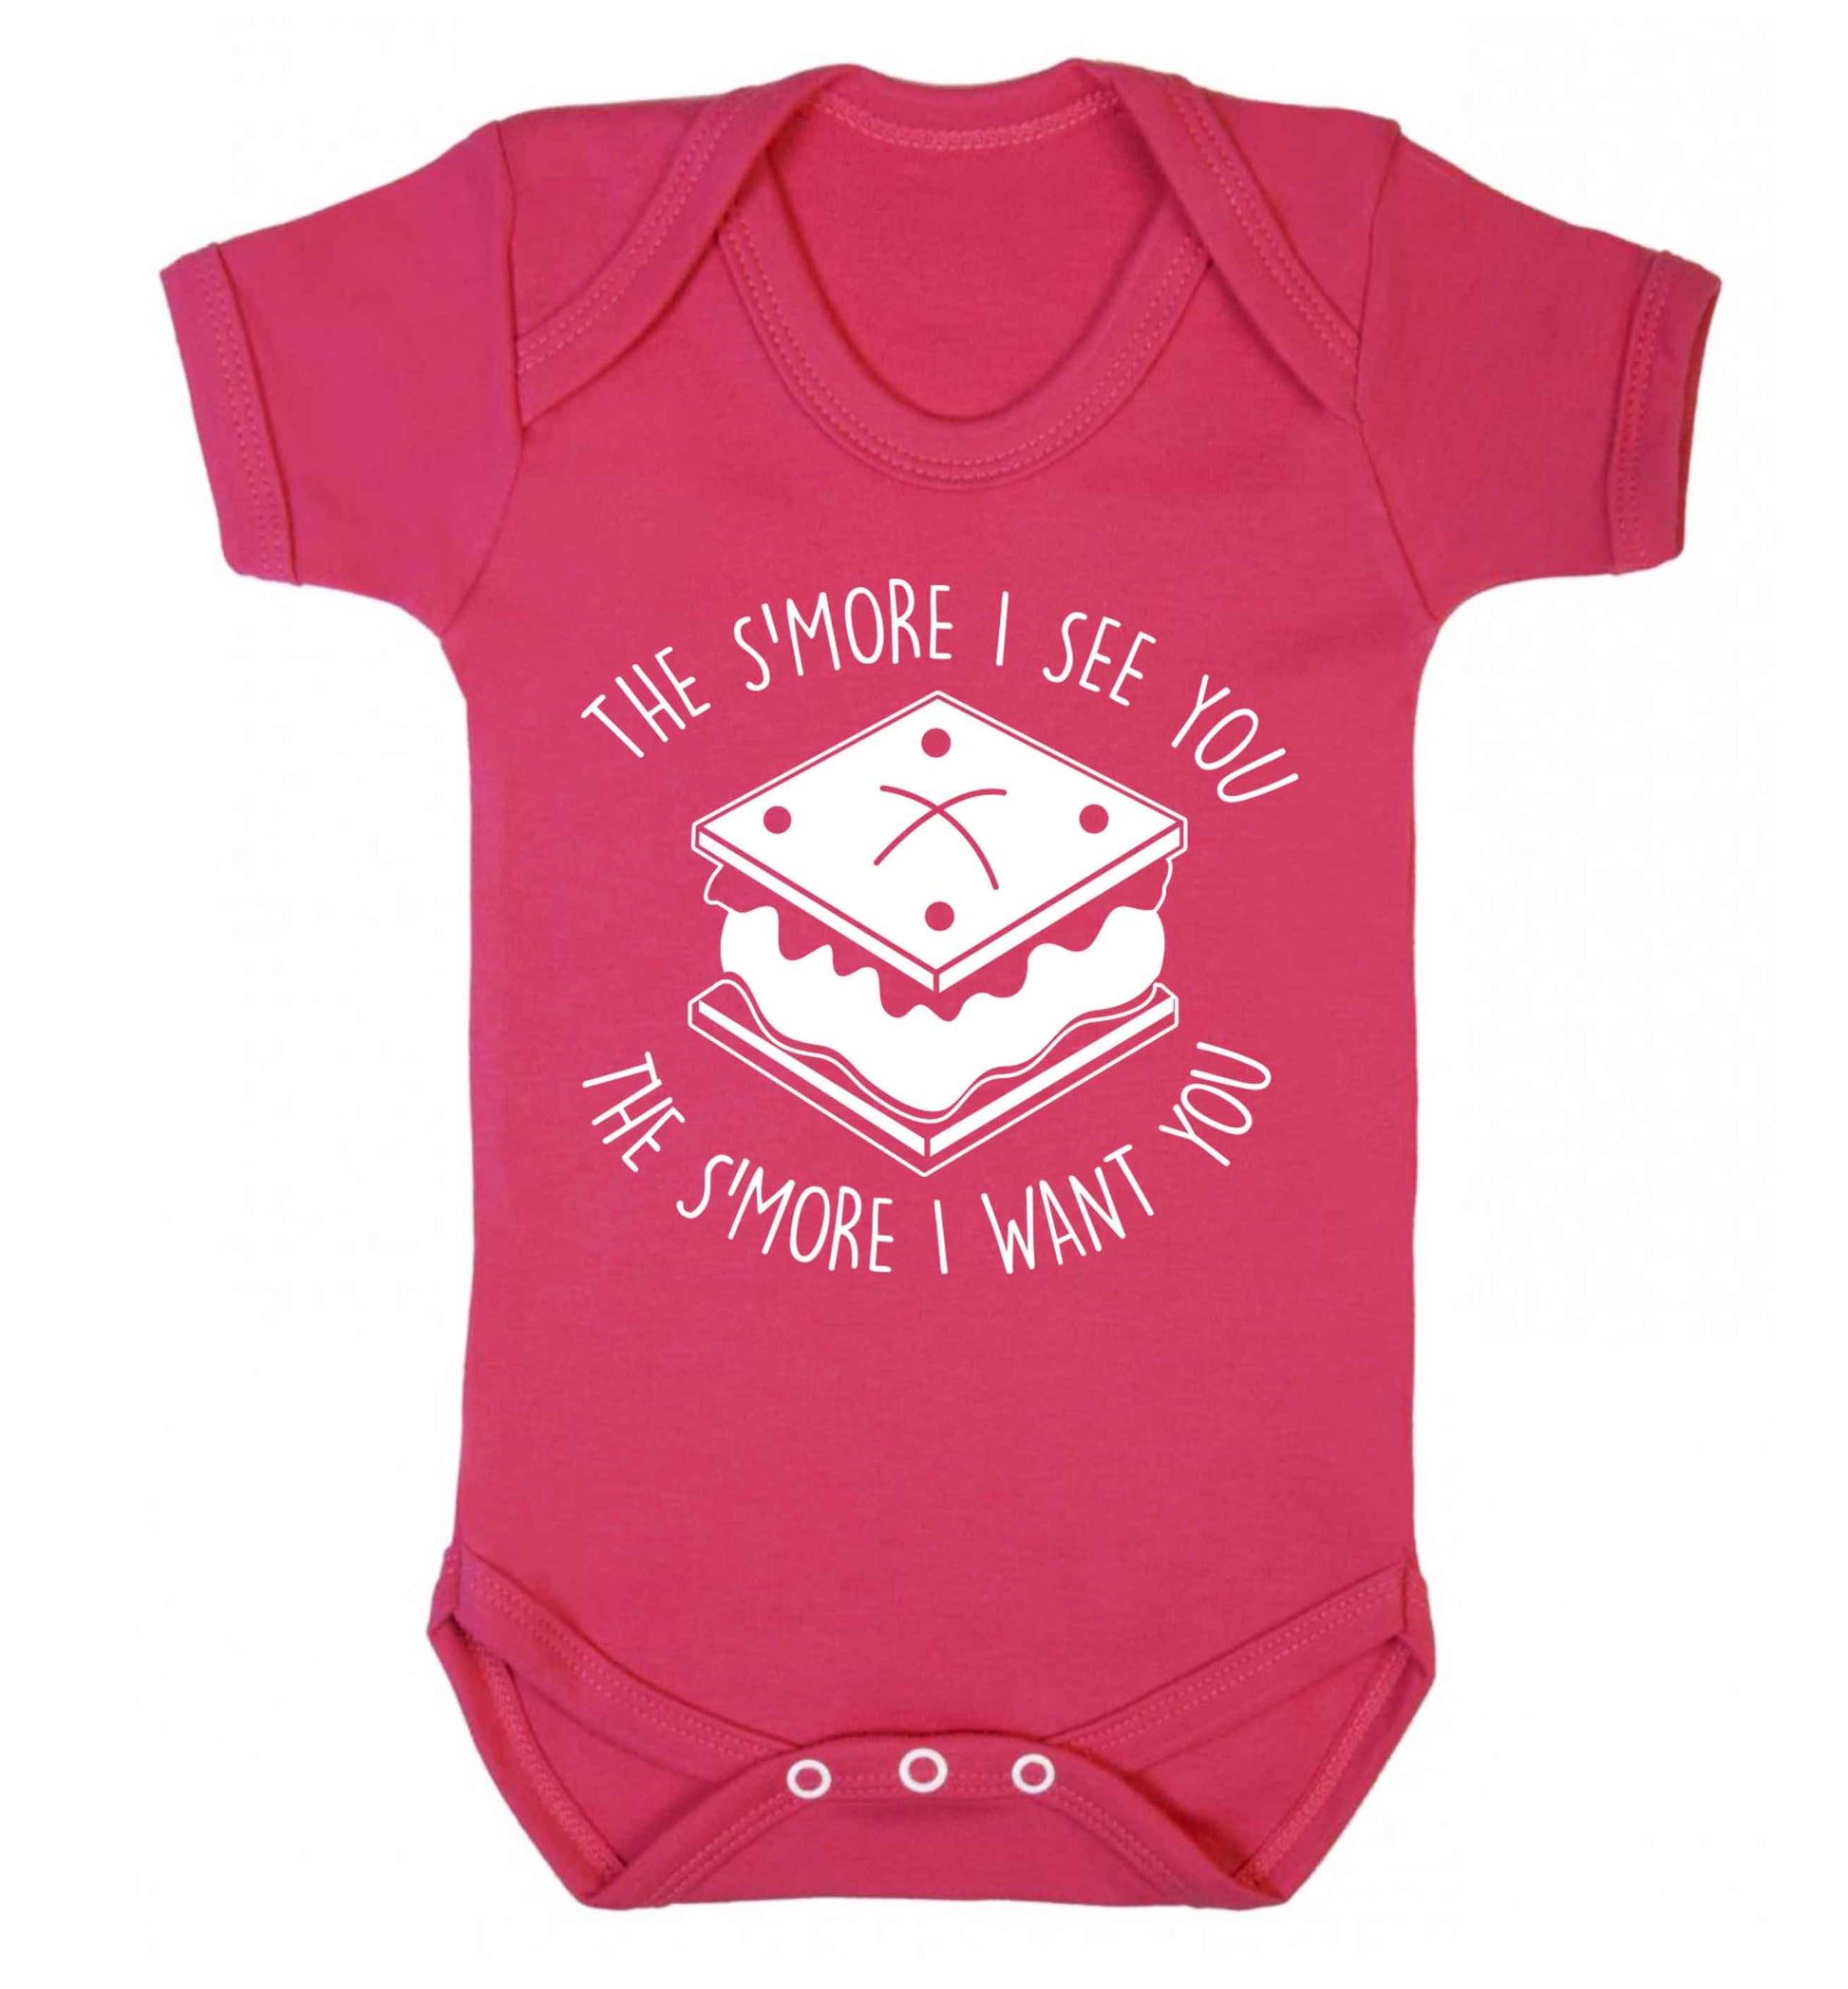 The s'more I see you the s'more I want you Baby Vest dark pink 18-24 months